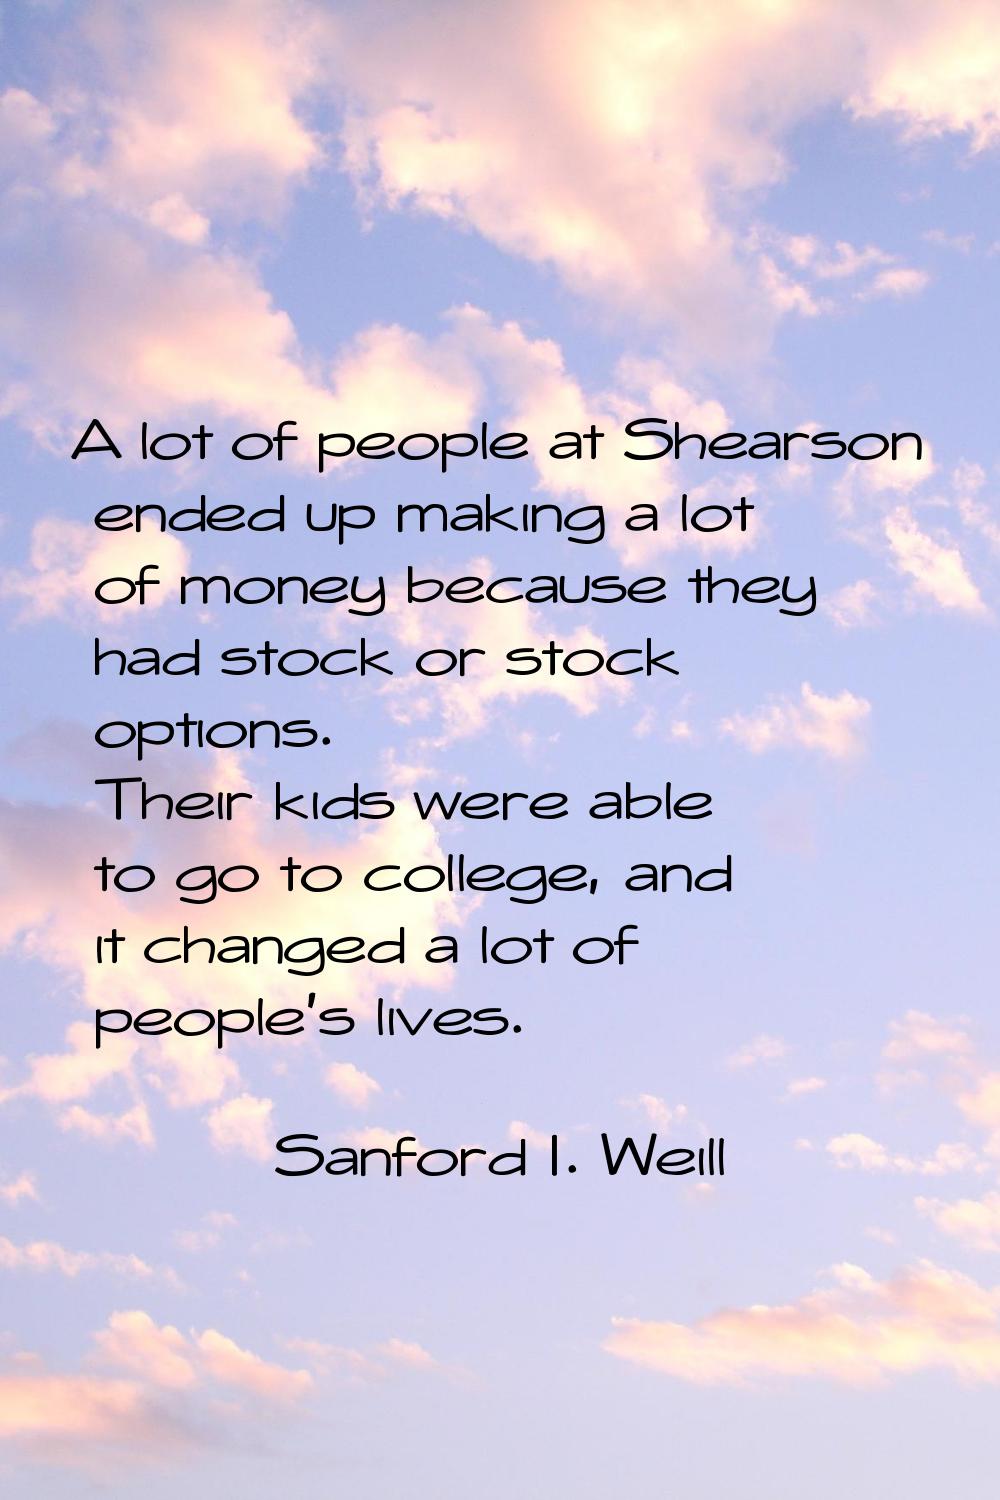 A lot of people at Shearson ended up making a lot of money because they had stock or stock options.